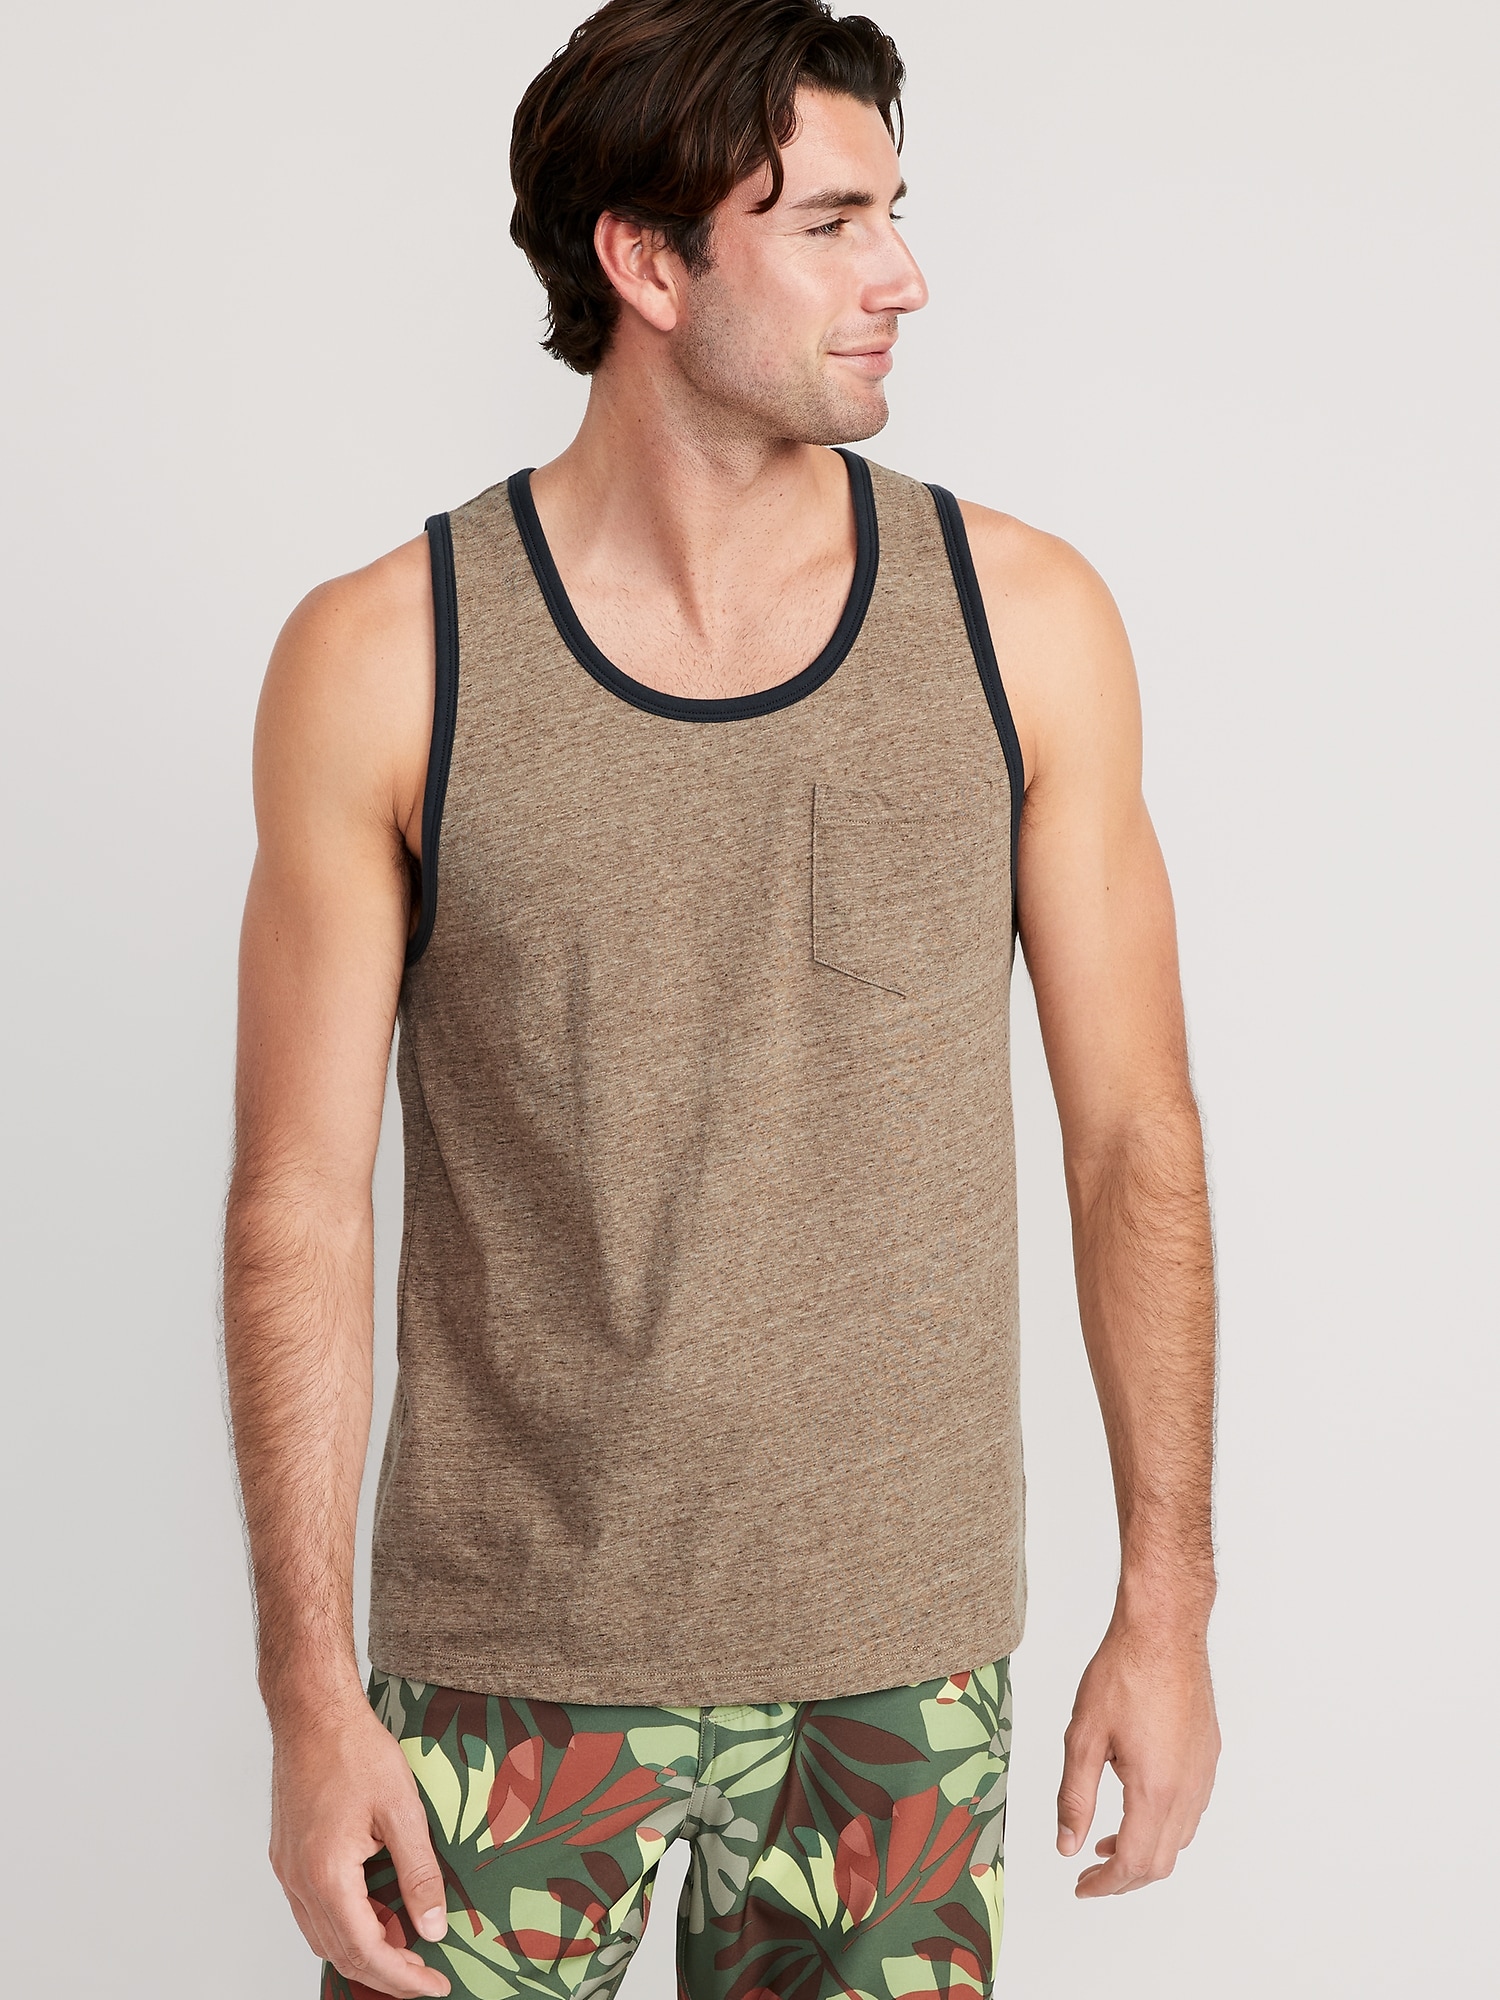 Old Navy Classic Pocket Tank Top for Men brown. 1